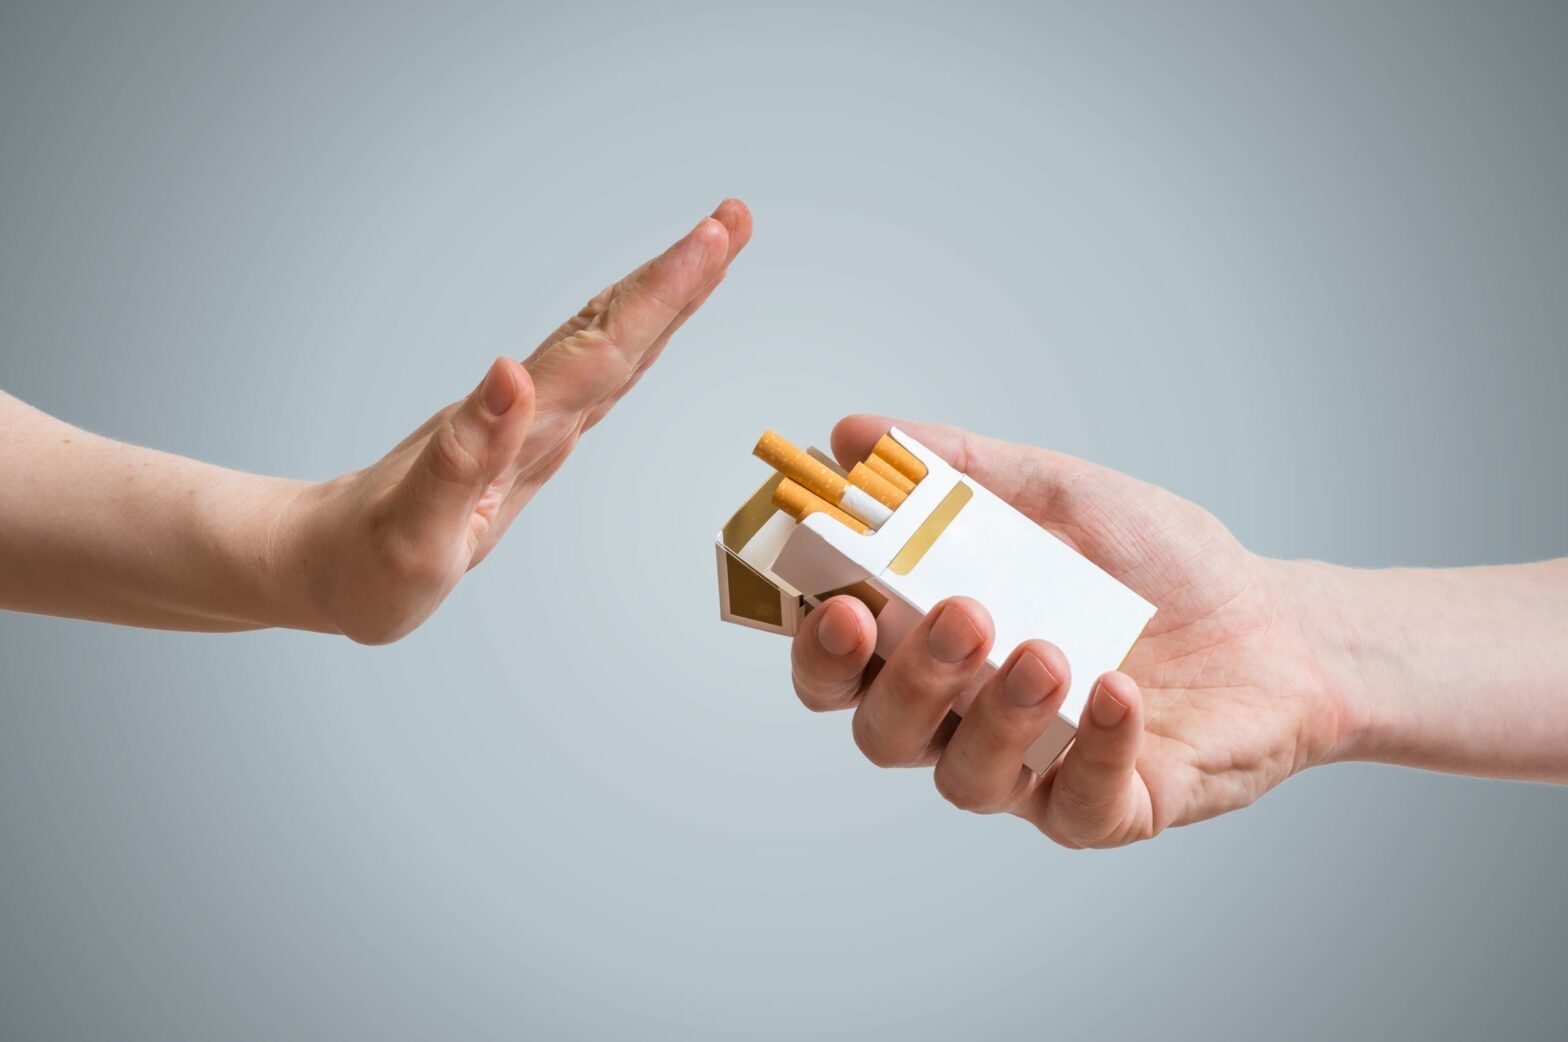 Can a tobacco firm really be sustainable? Yes, according to flawed ESG ratings